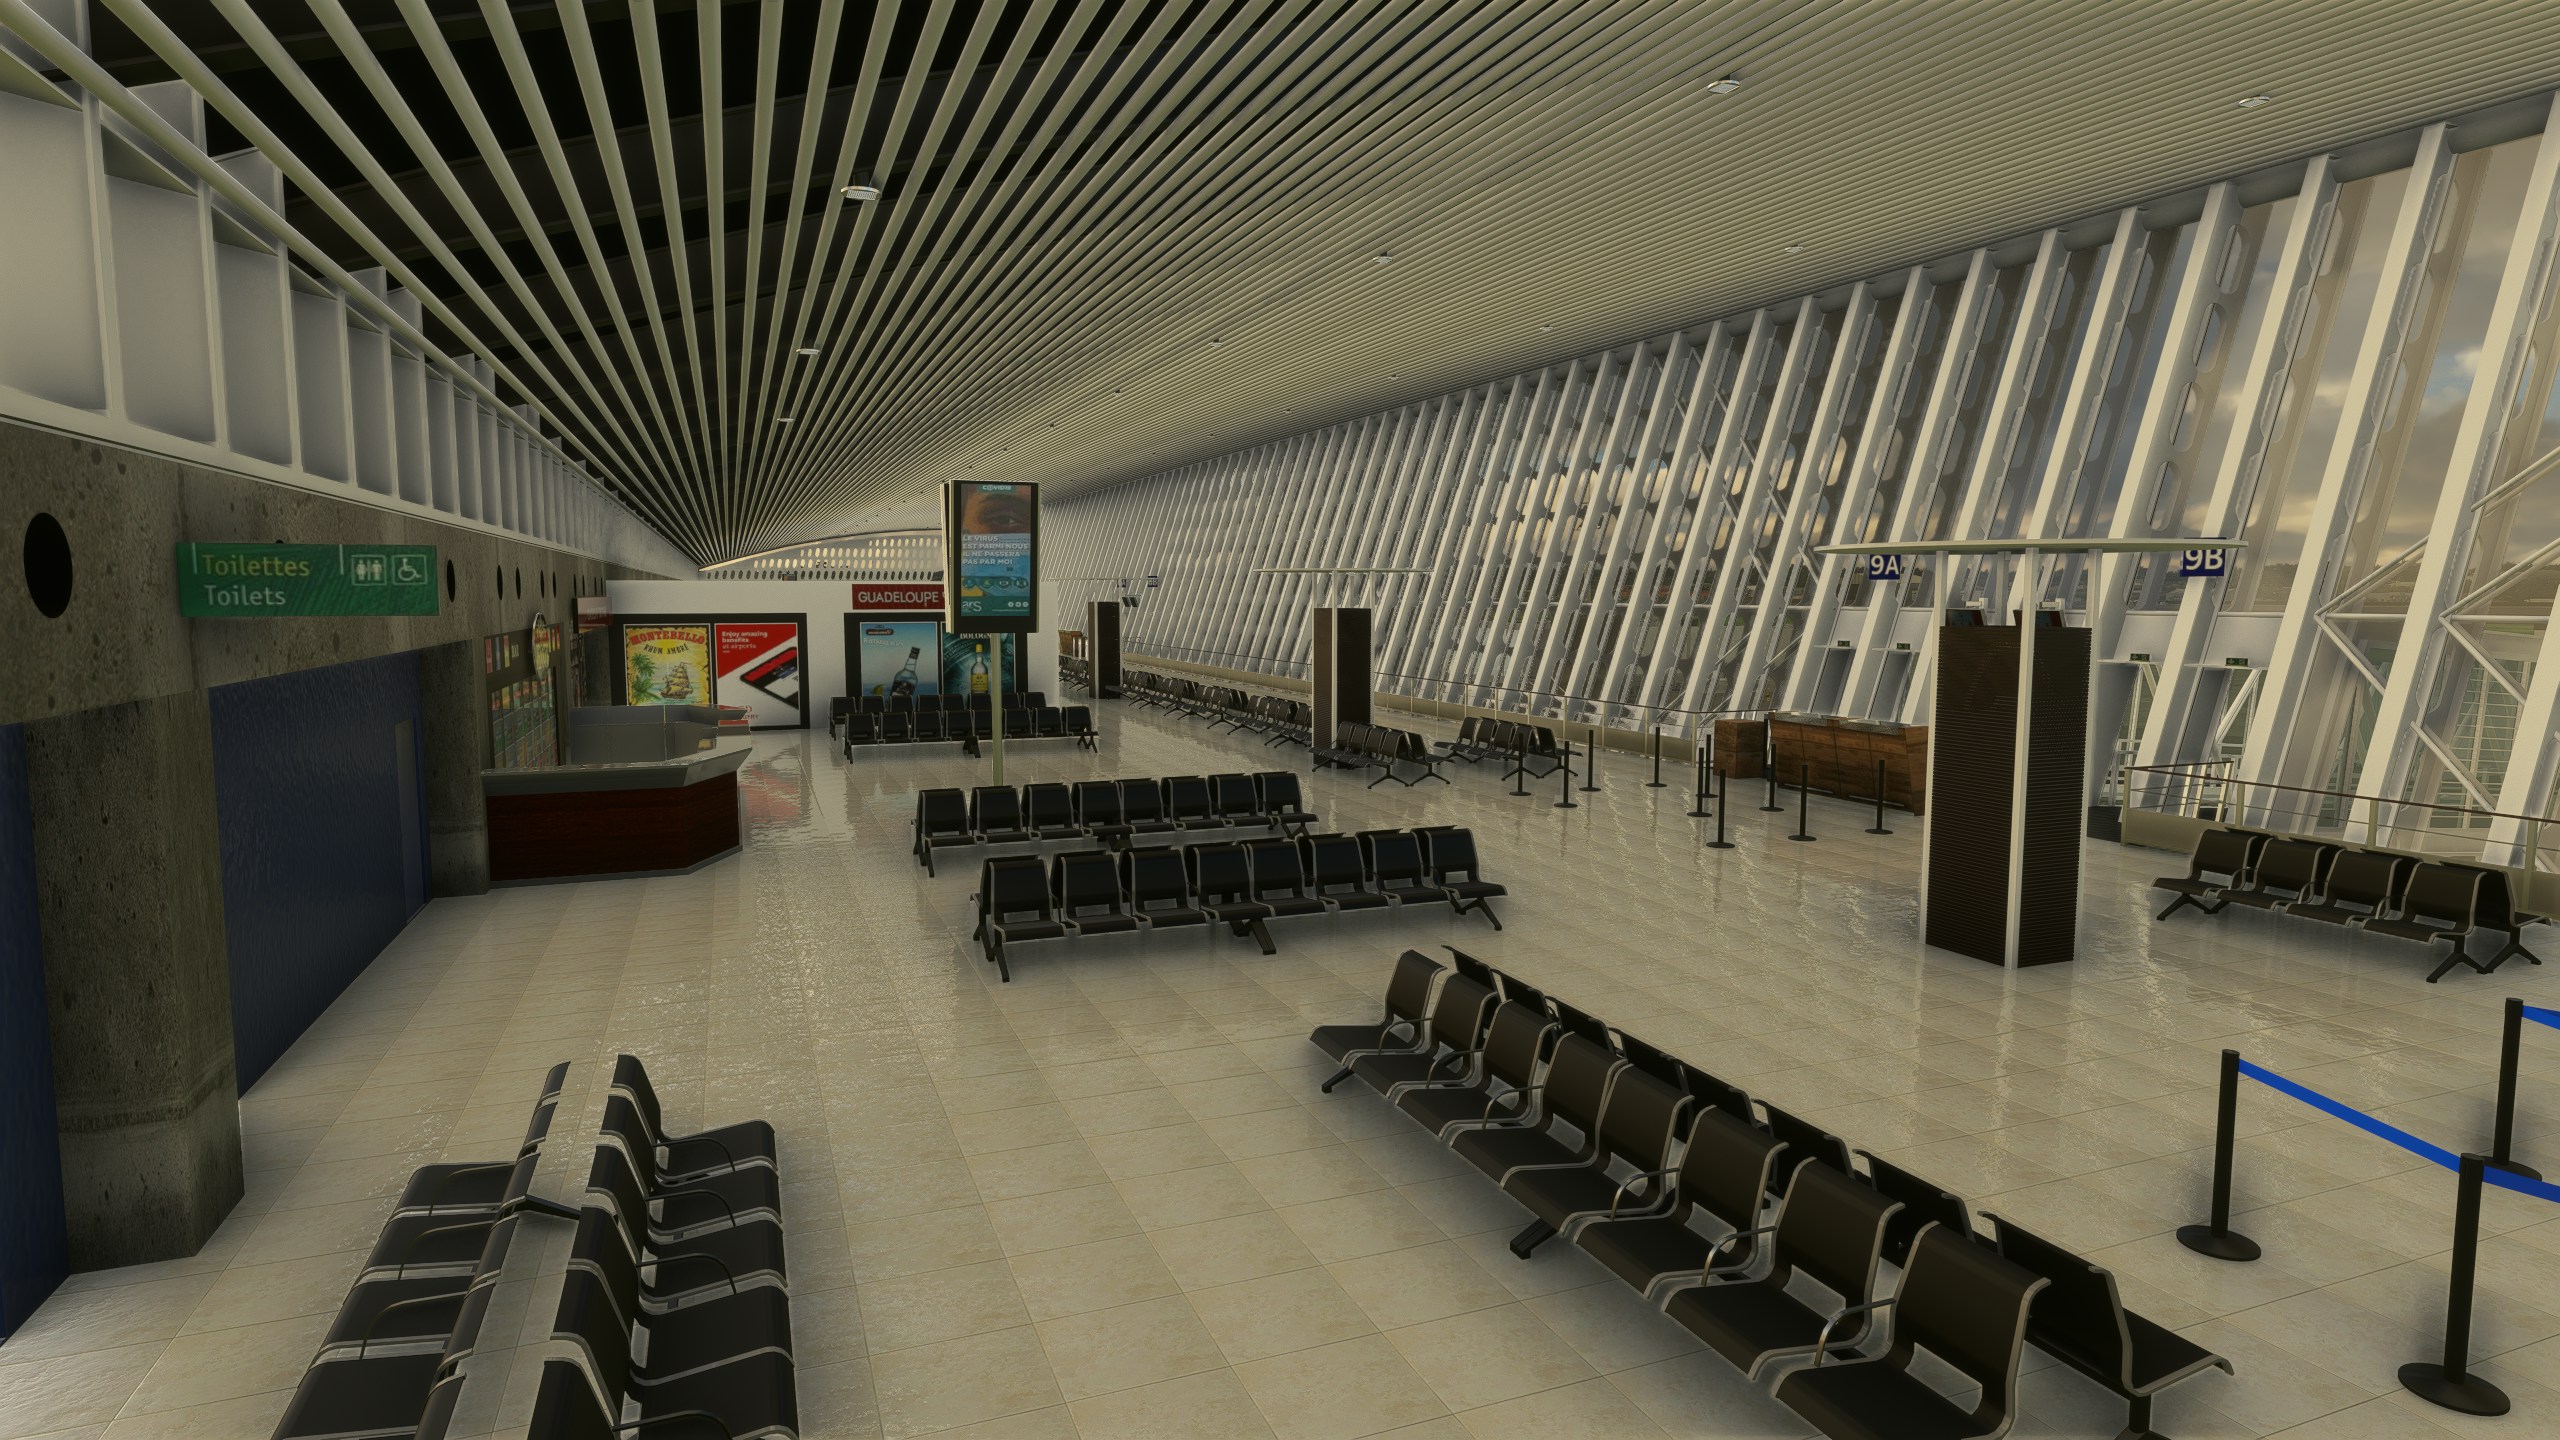 SLH Sim Designs has Released Pointe- A-Pitre Le Raizet Airport for MSFS